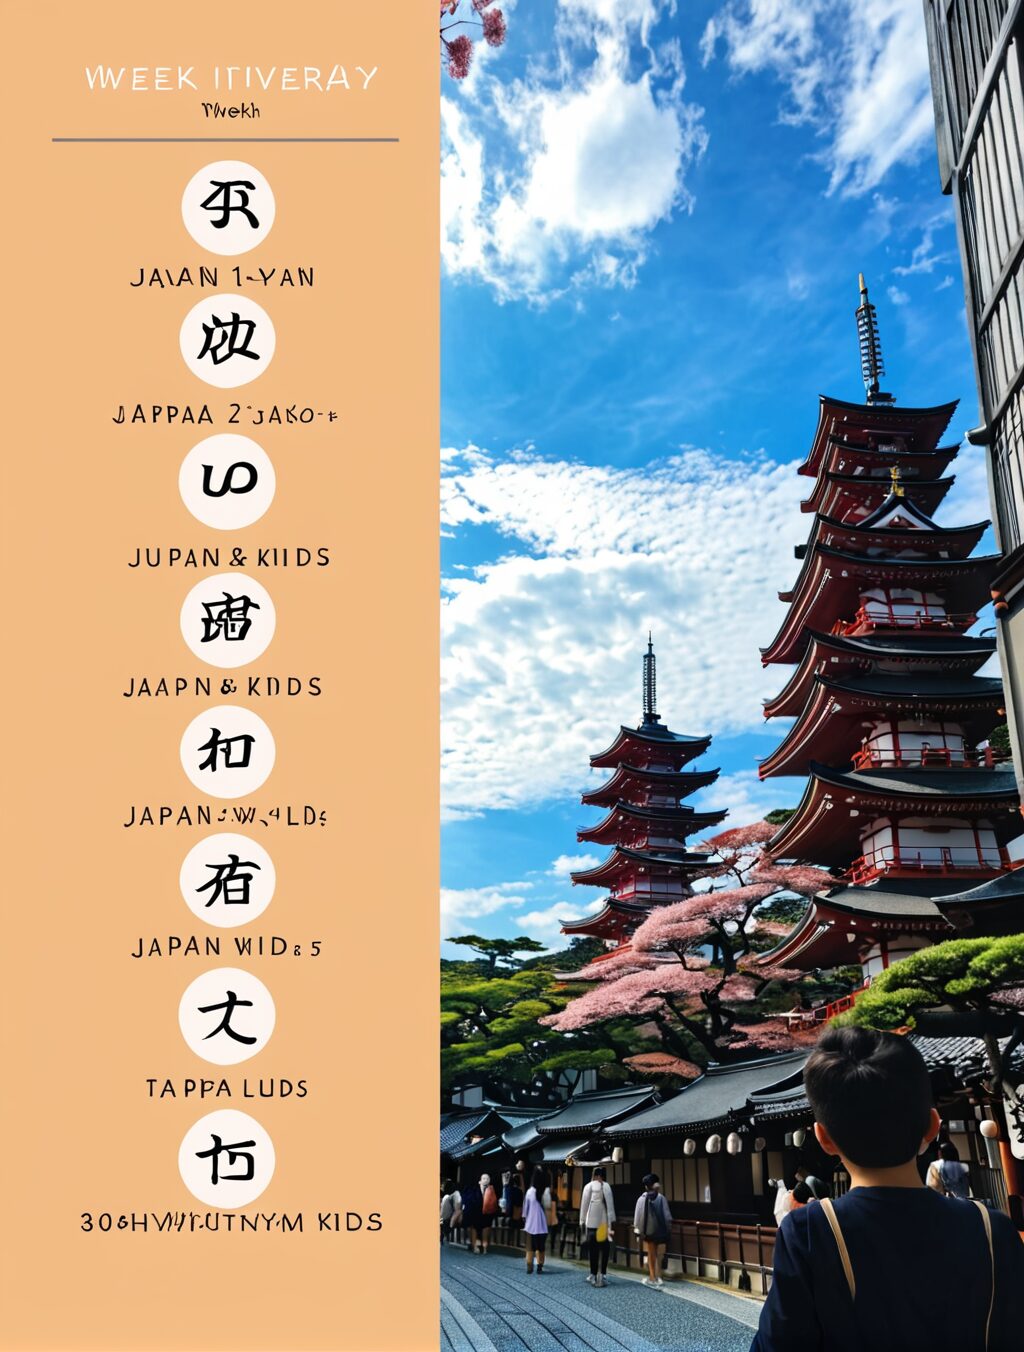 1 week itinerary japan with kids